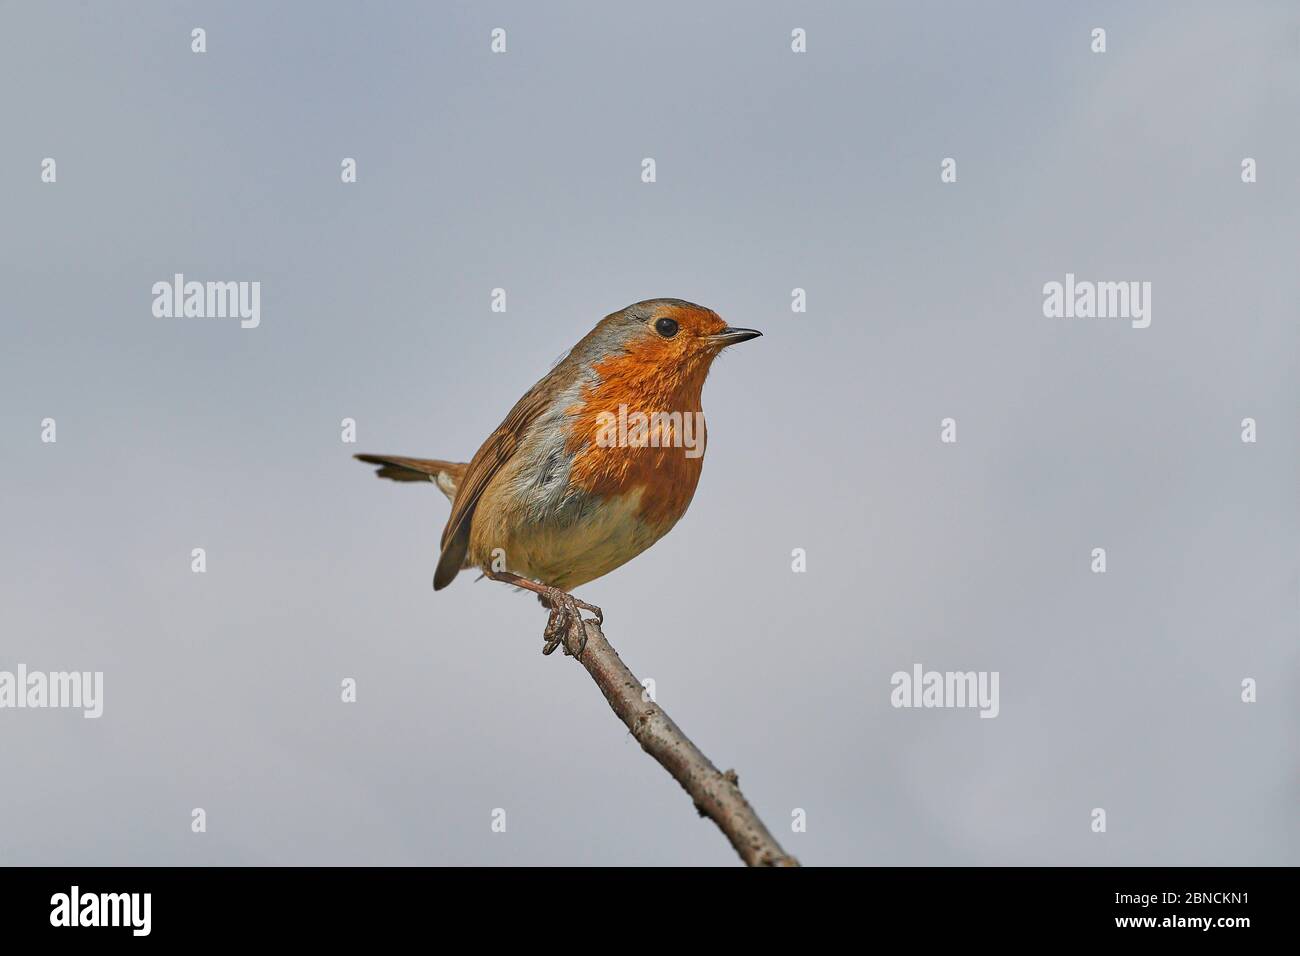 A lone Robin (Erithacus Rubecula) sat on a single branch with a clear blue background Stock Photo